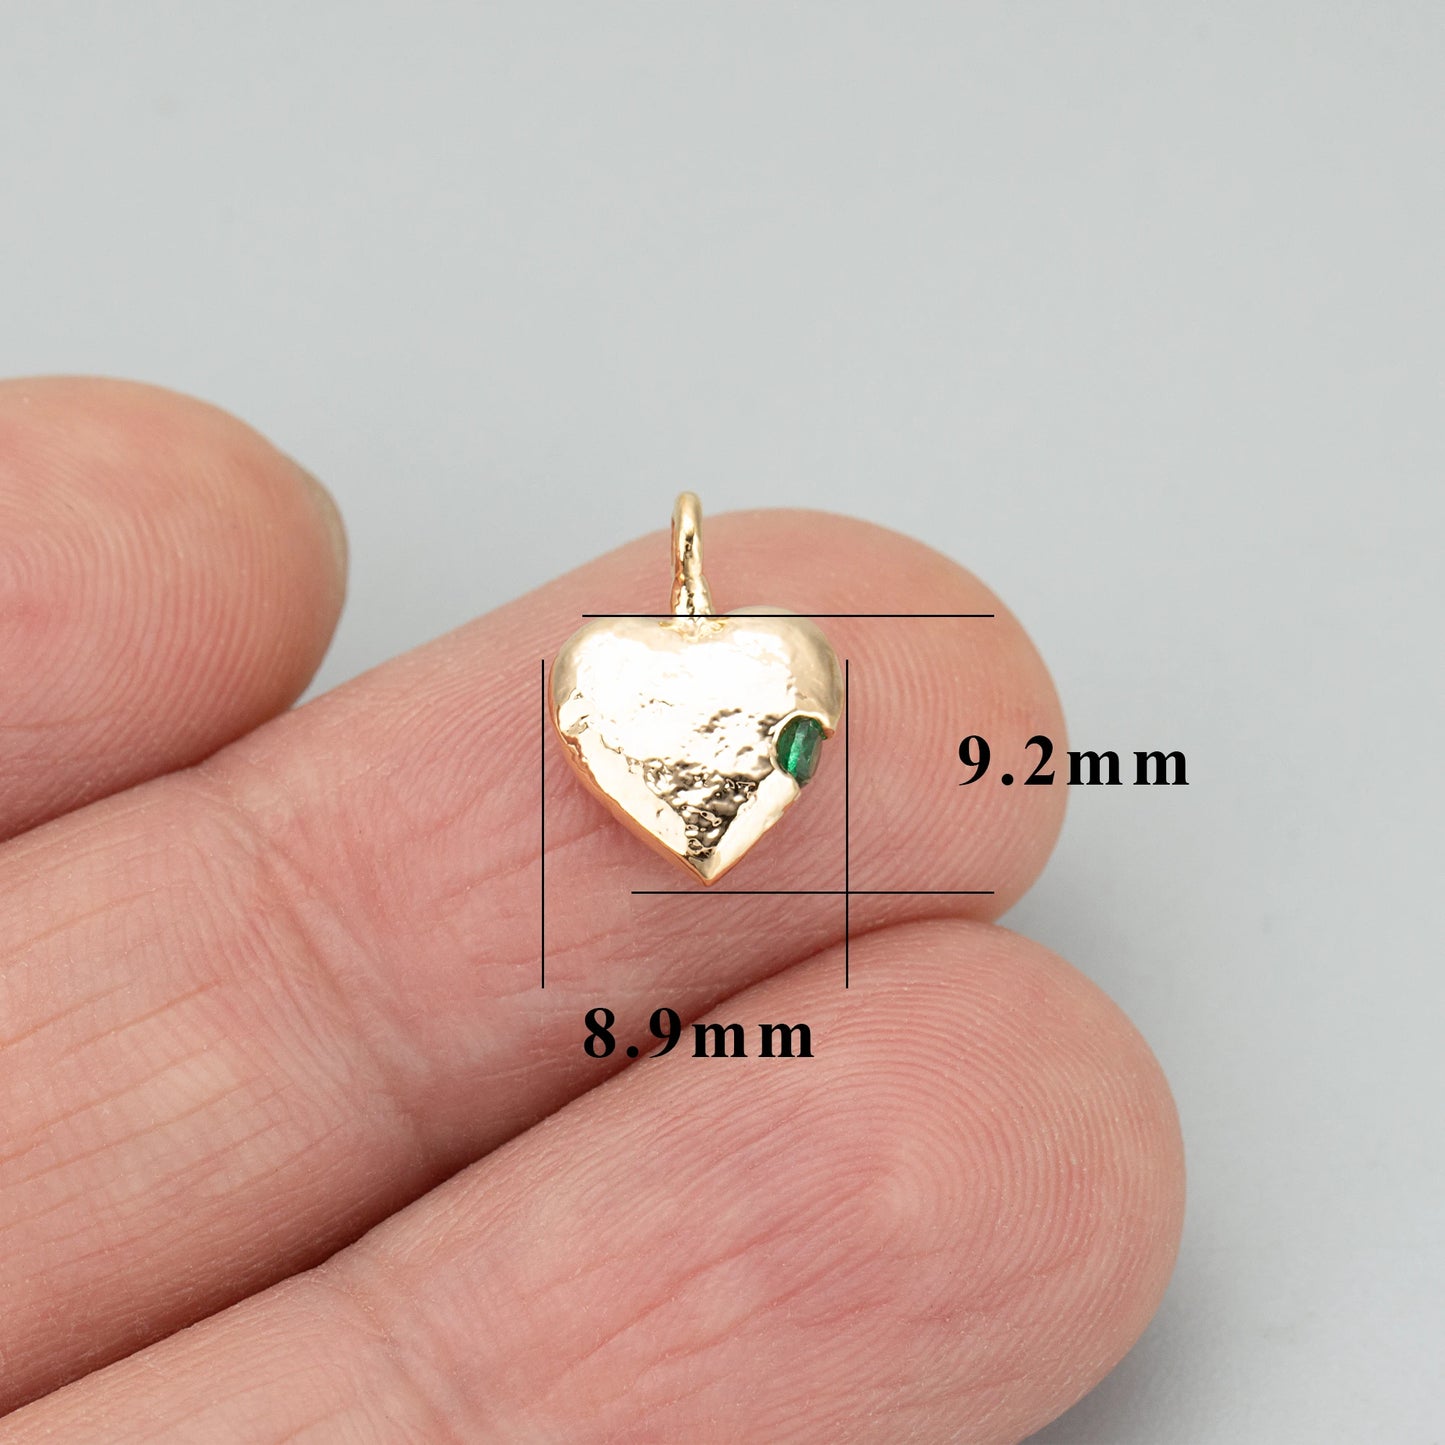 GUFEATHER ME44,jewelry accessories,18k gold rhodium plated,copper,heart shape,charms,diy pendants,jewelry making,6pcs/lot